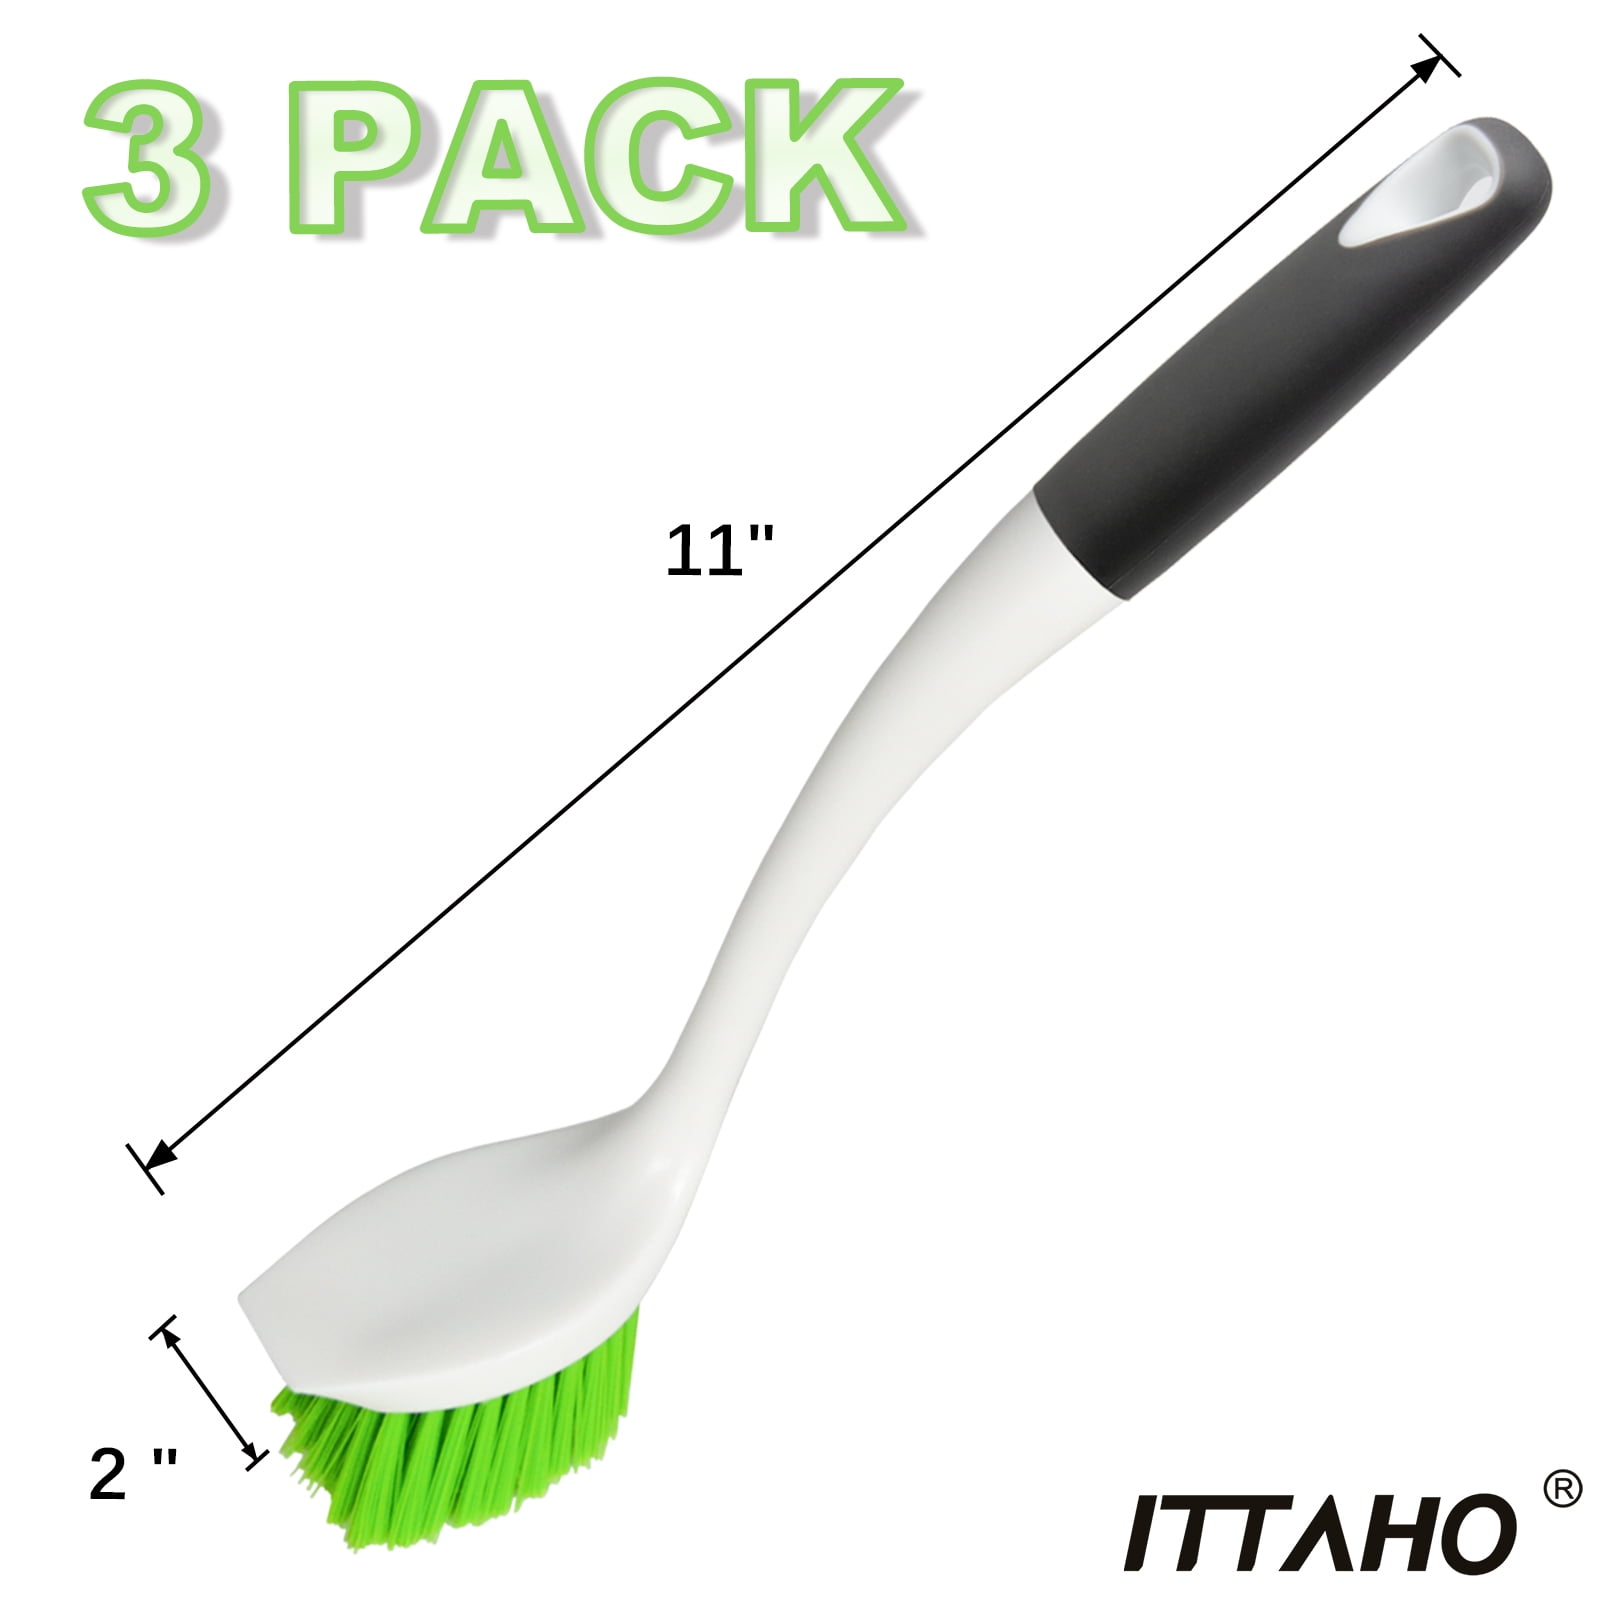 Ittaho Dish Scrubber Set, Kitchen Brush for Cleaning with Scraper Edge, Green Multi-Purpose Scrub Brush with Handle for Dishes,Sink,Pots,Pans,Shower